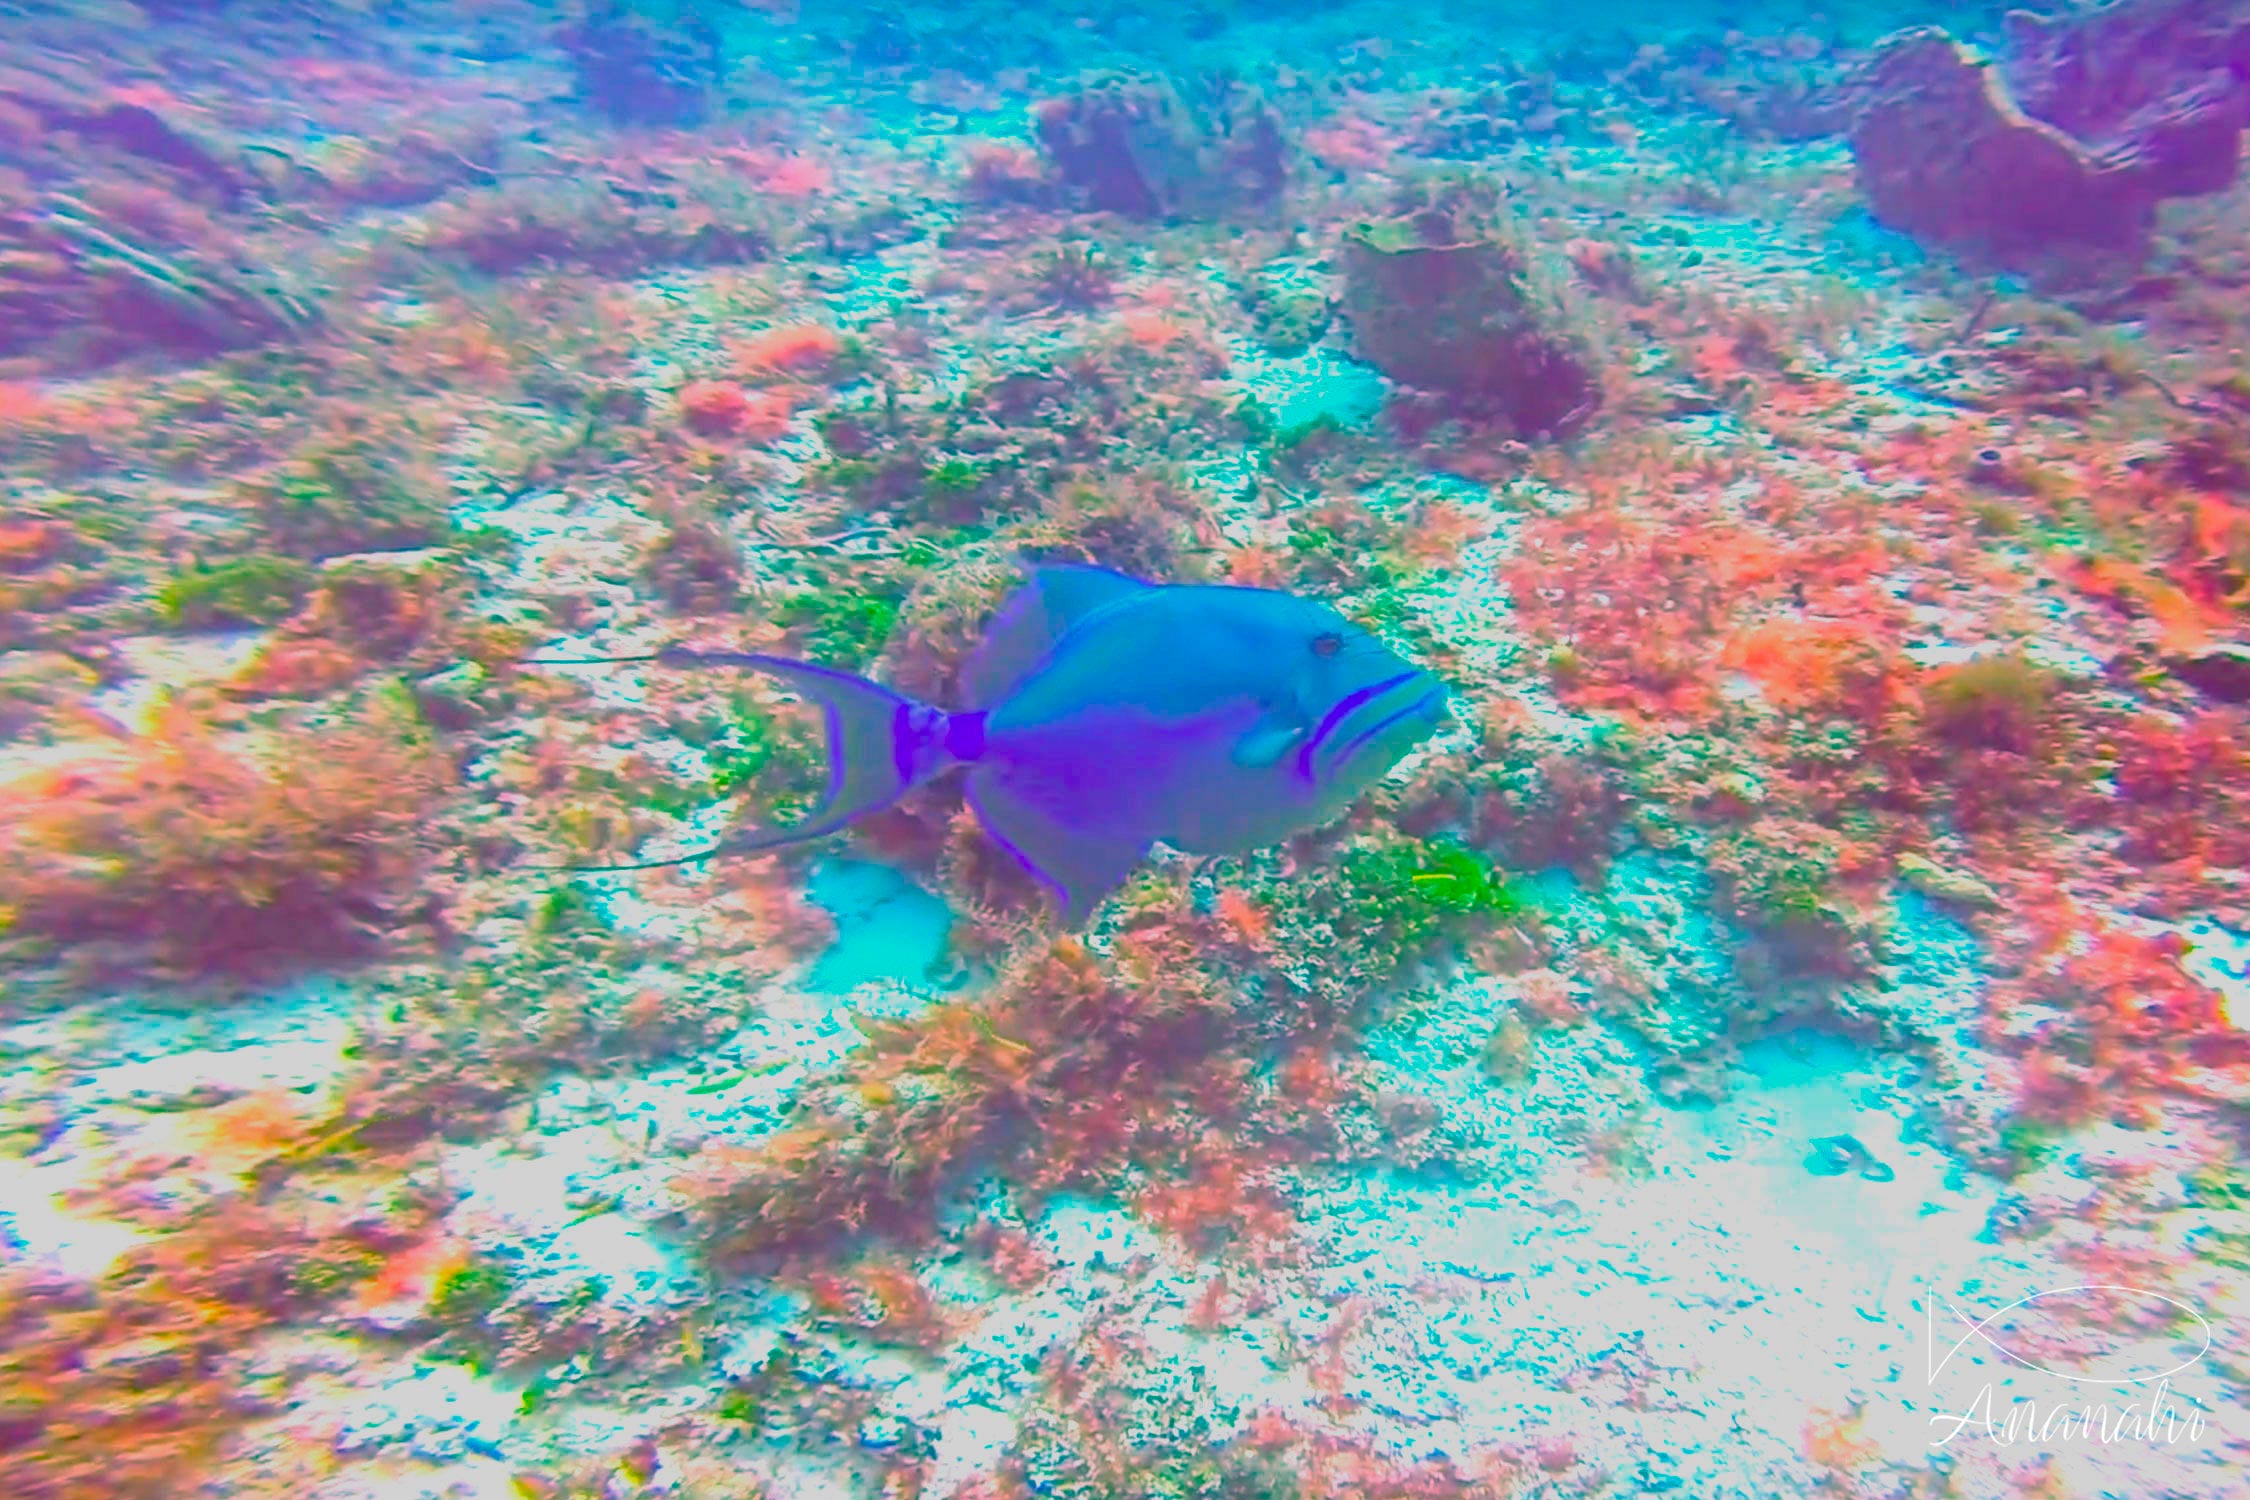 Queen triggerfish of Mexico